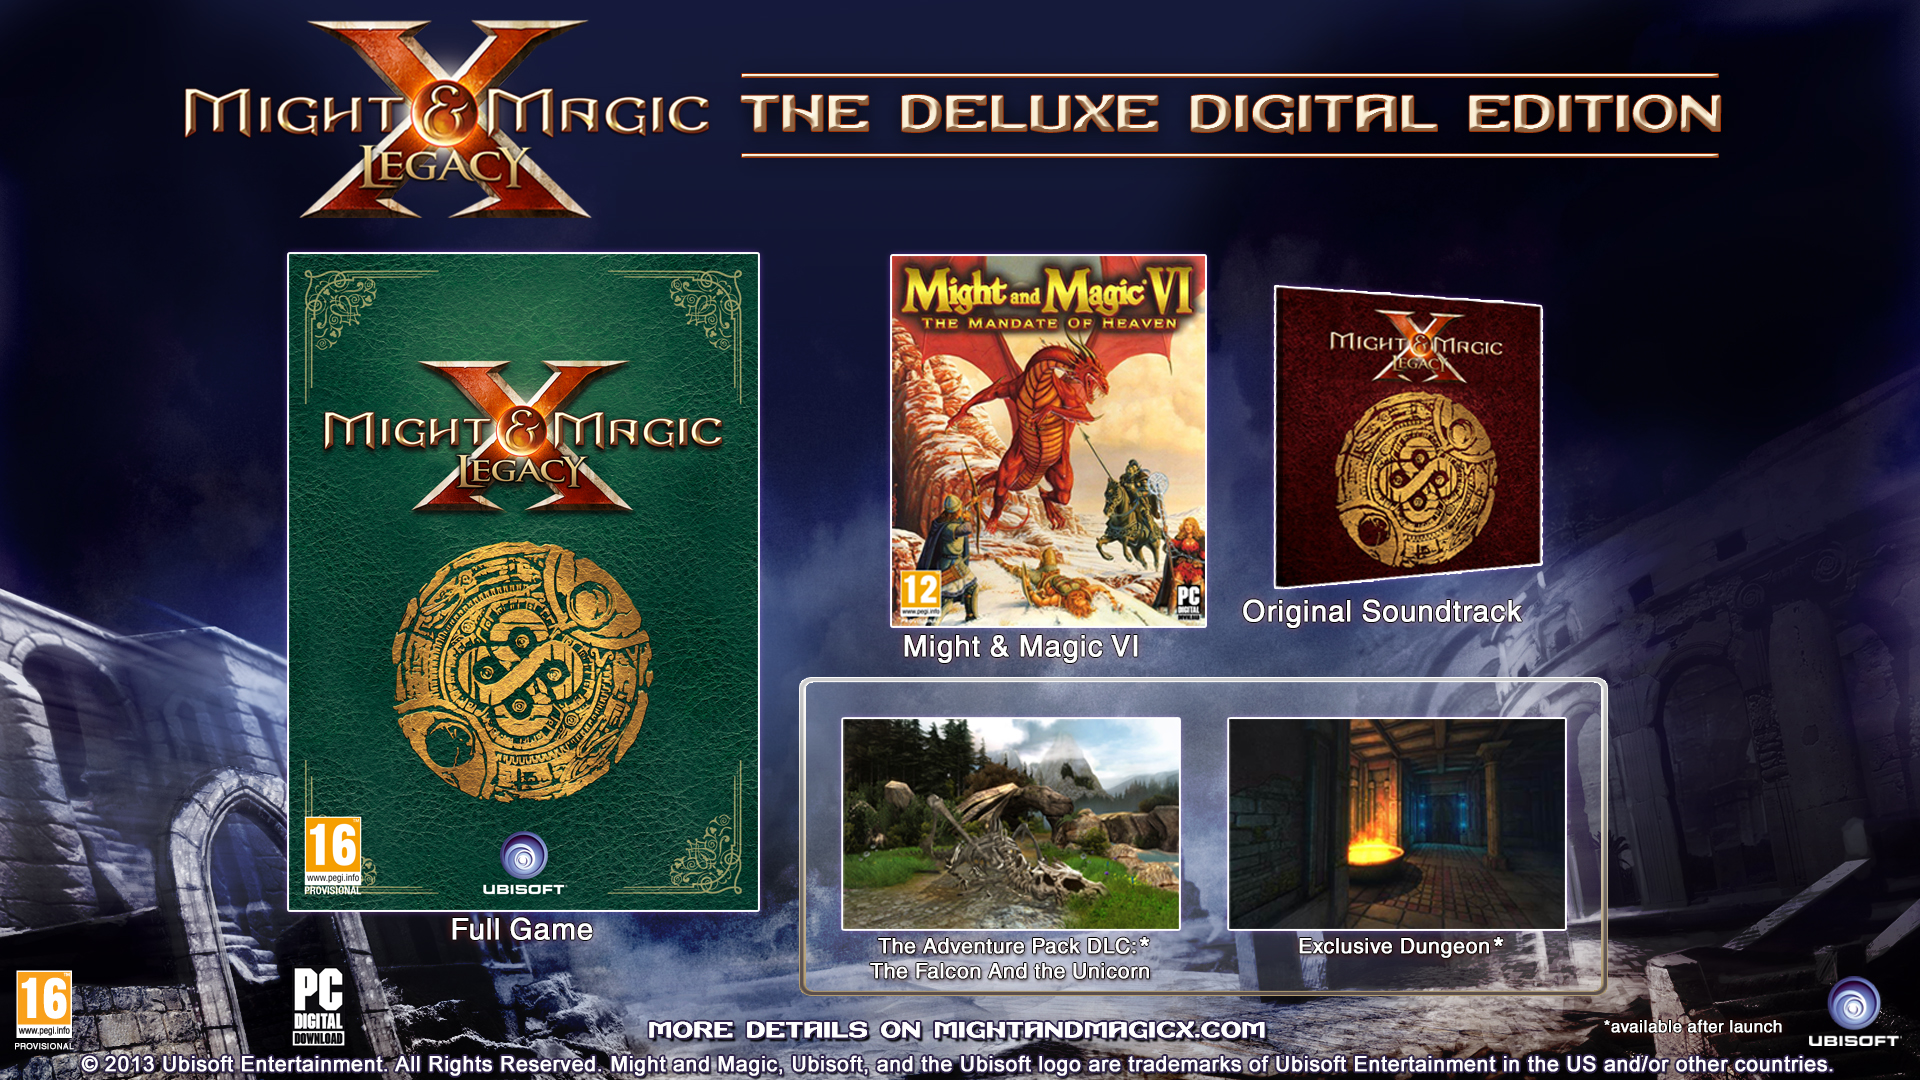 Might & Magic X - Legacy on Steam